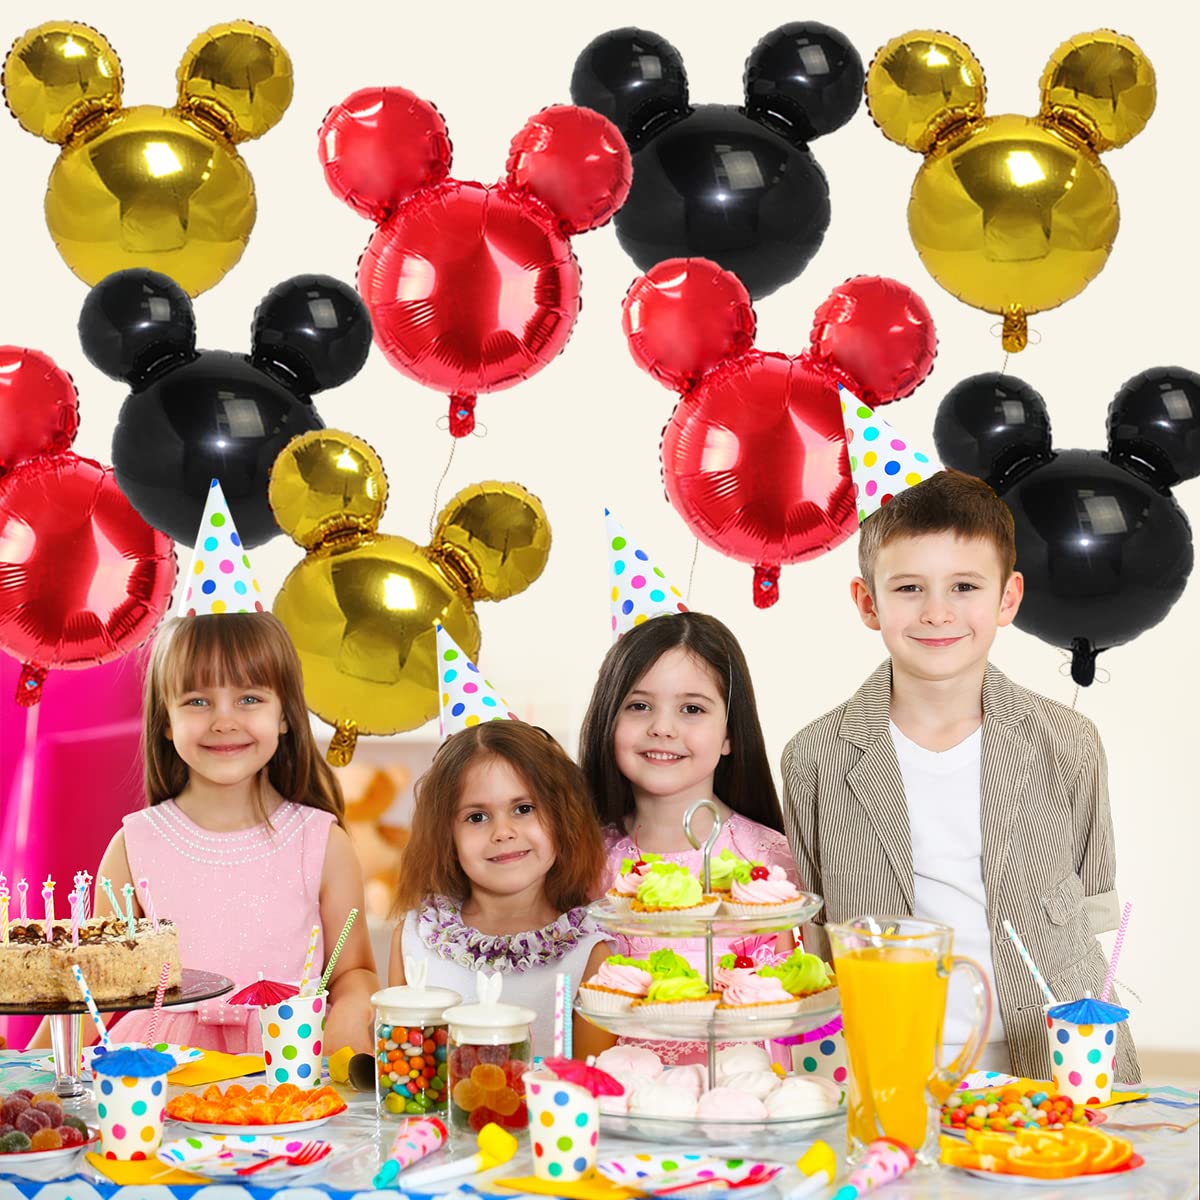 9Pack Mouse Party Aluminum foil Balloons, 27” Black Red Yellow Balloons For Mickey Party,Baby Shower, Kids Birthday Theme Party Decoration Supplies